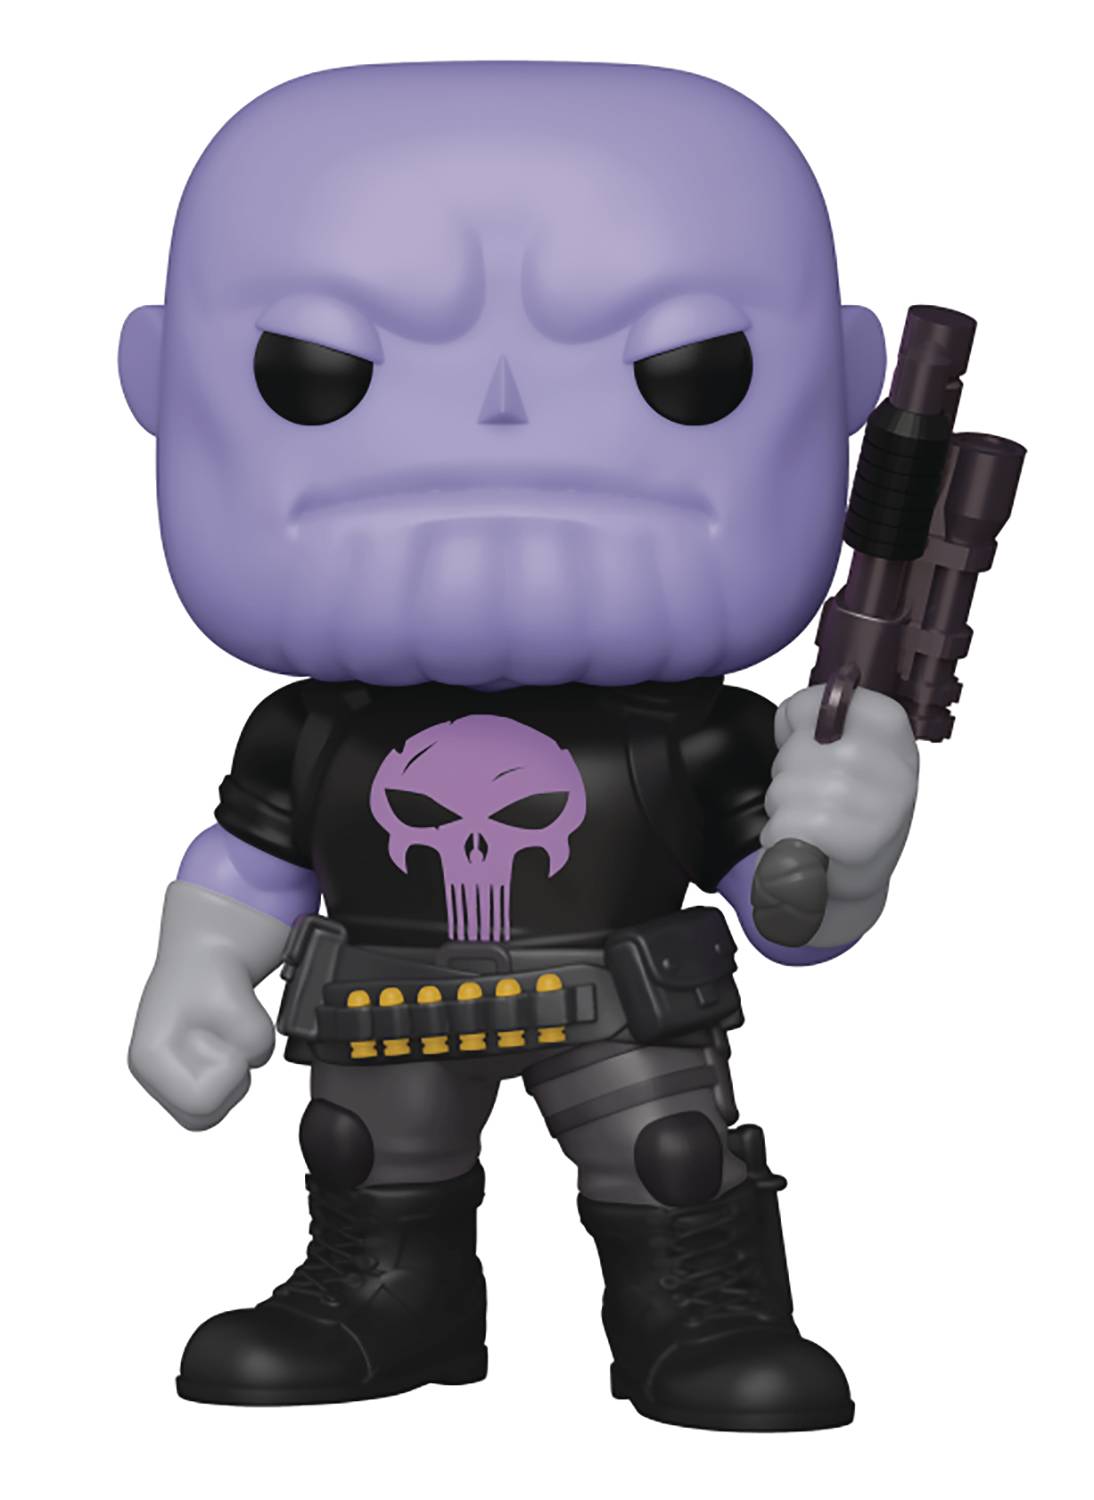 POP SUPER MARVEL HEROES THANOS EARTH-18138 PX 6IN VIN FIG (C